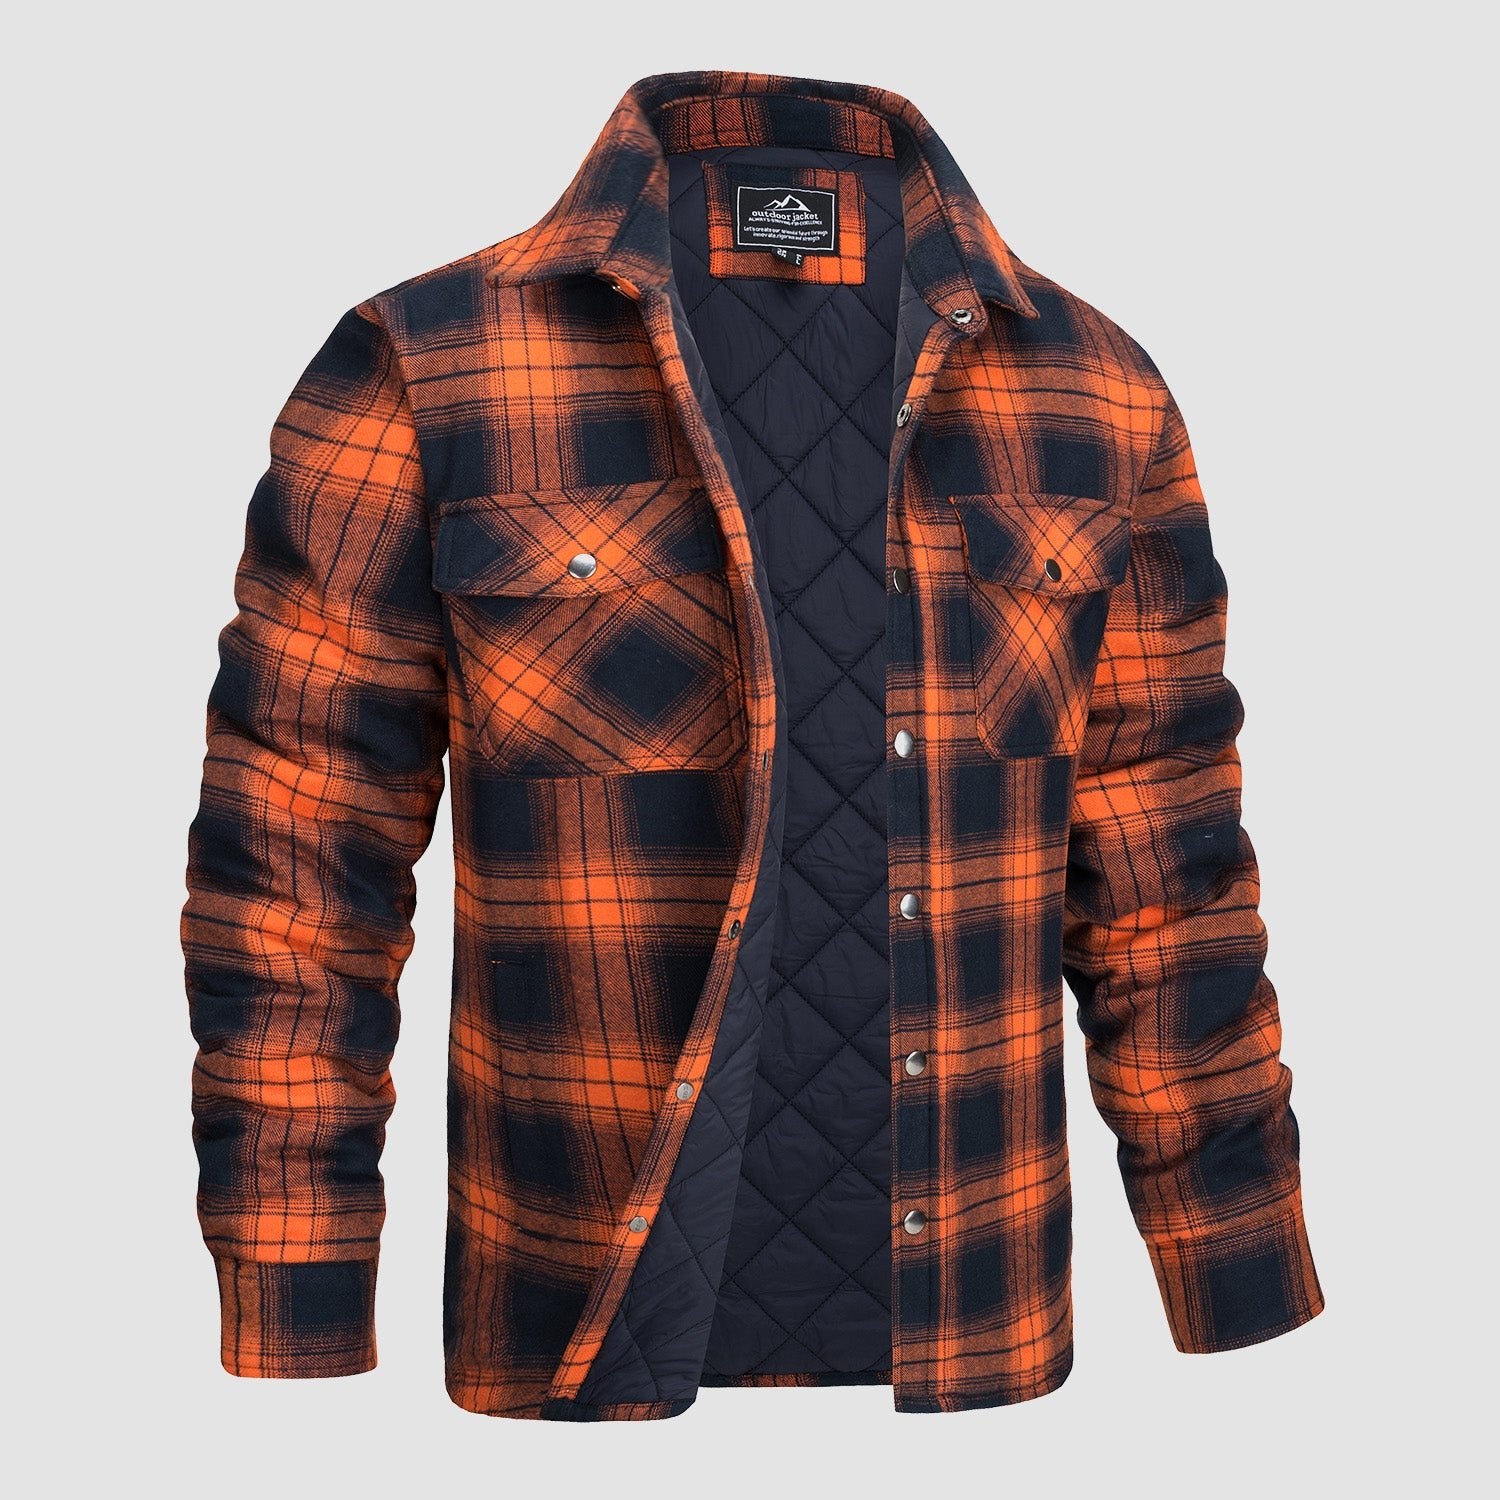 Casual Plaid Pattern Men's Long Sleeve Hooded Shirt Jacket, Men's Button Up  Outwear For Fall Winter Outdoor